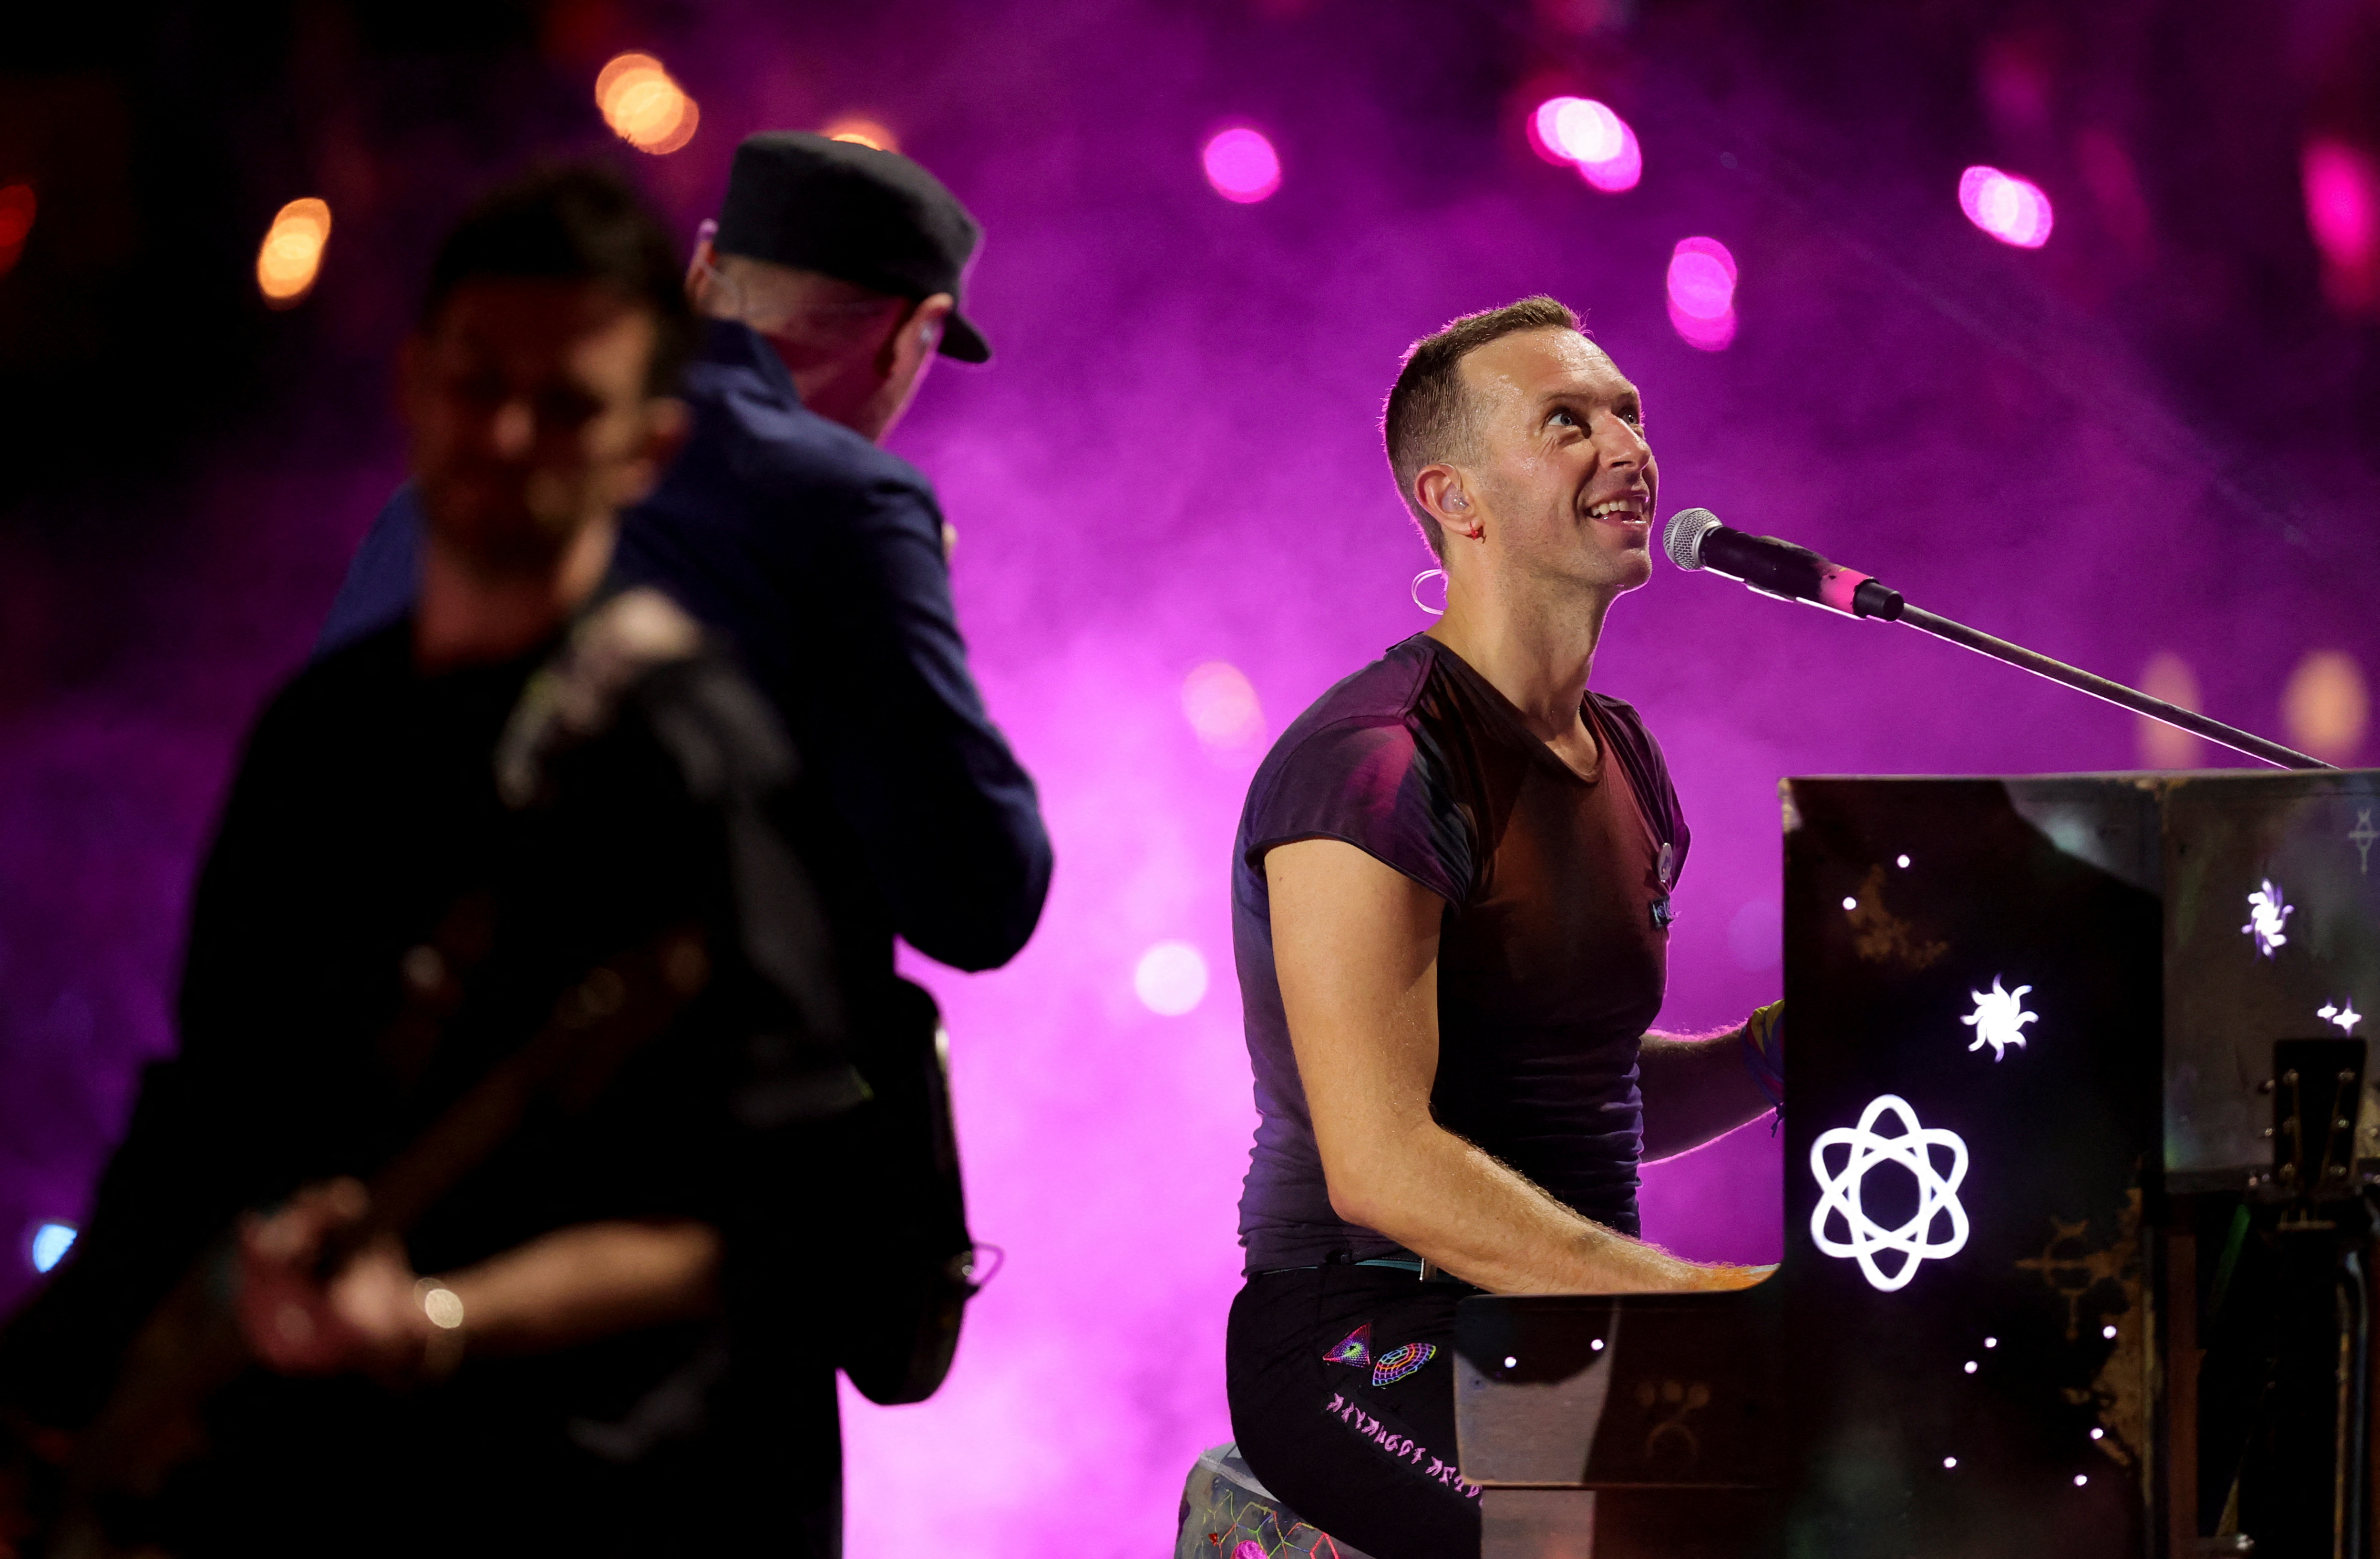 Coldplay performs at Expo 2020 in Dubai, United Arab Emirates, February 15, 2022. REUTERS/Christopher Pike